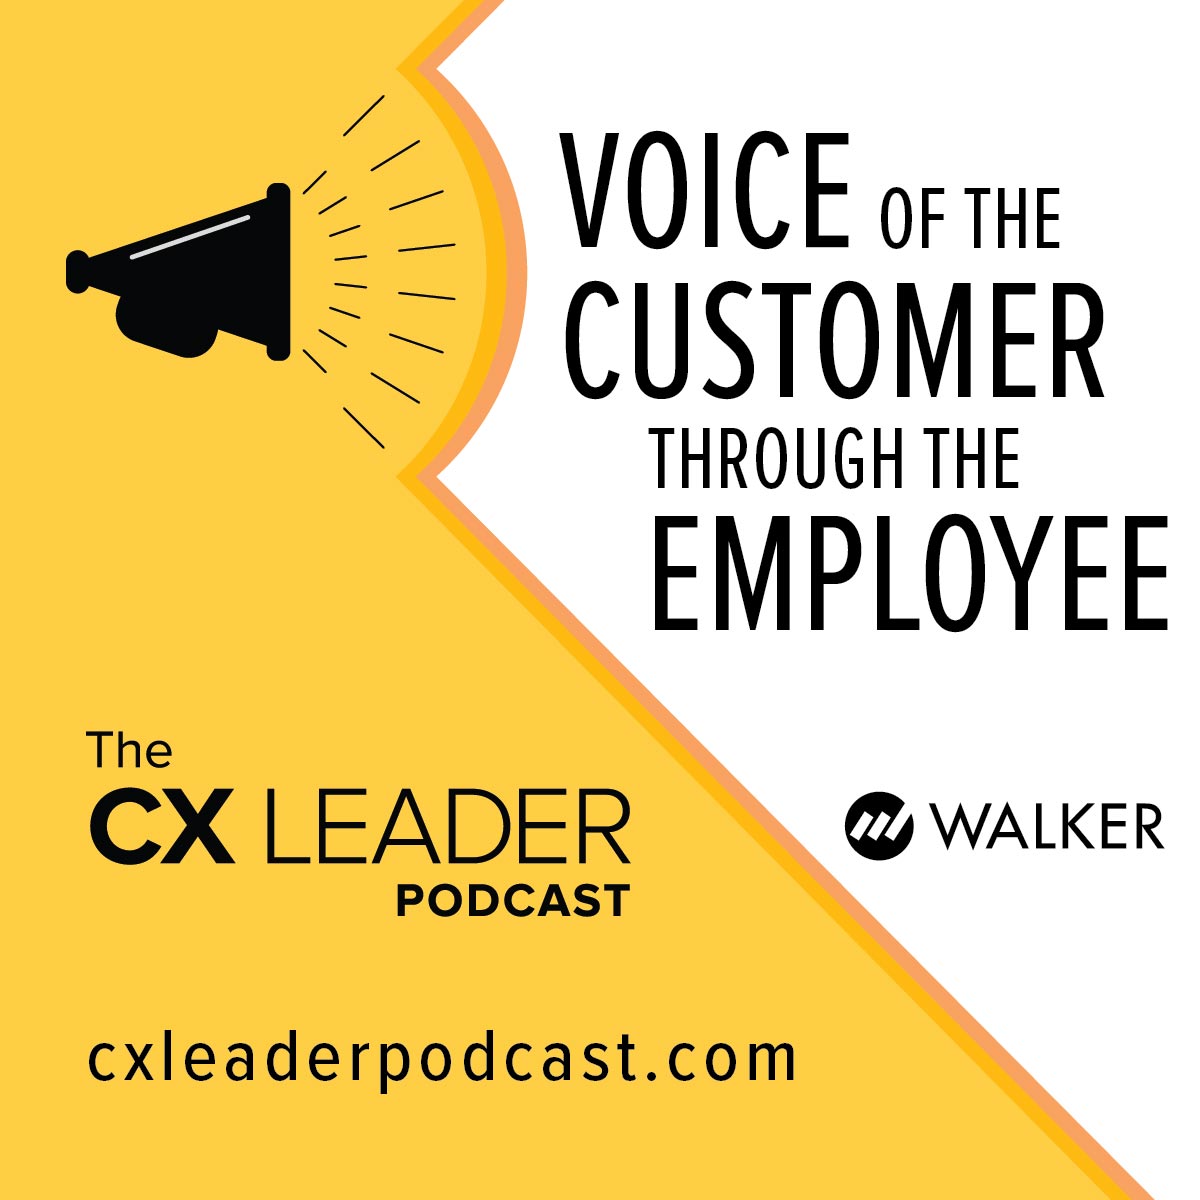 Voice of the Customer through the Employee